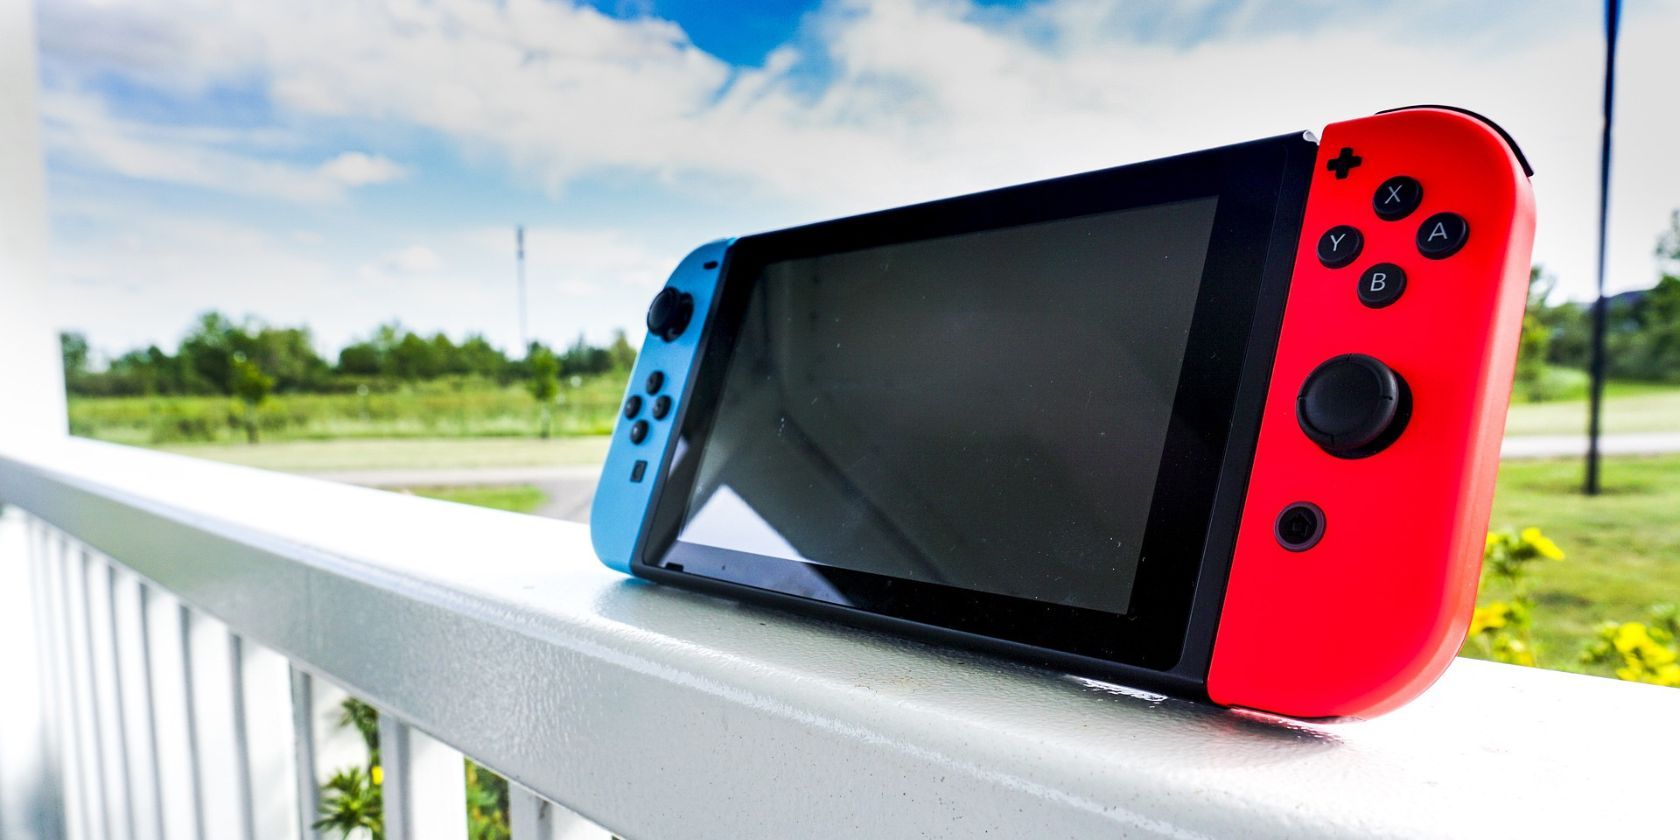 A Nintendo Switch sitting propped up on a banister